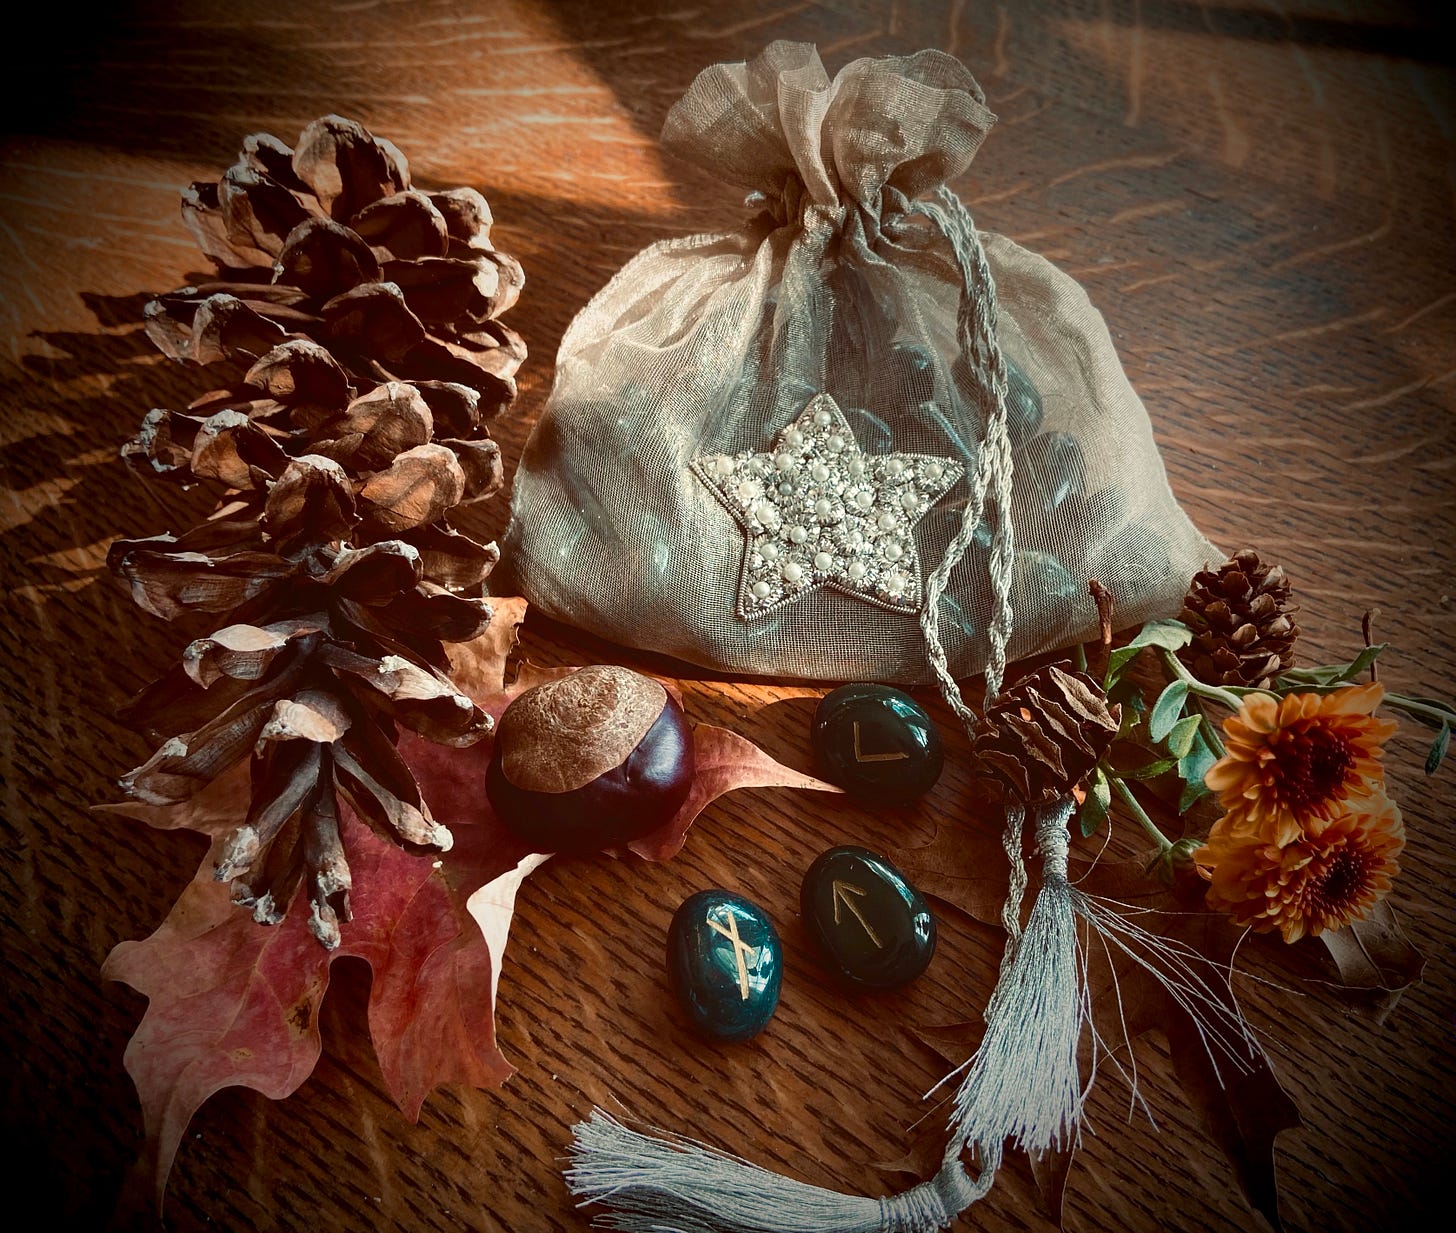 Rune stones and star bag amid autumn leaves and mums